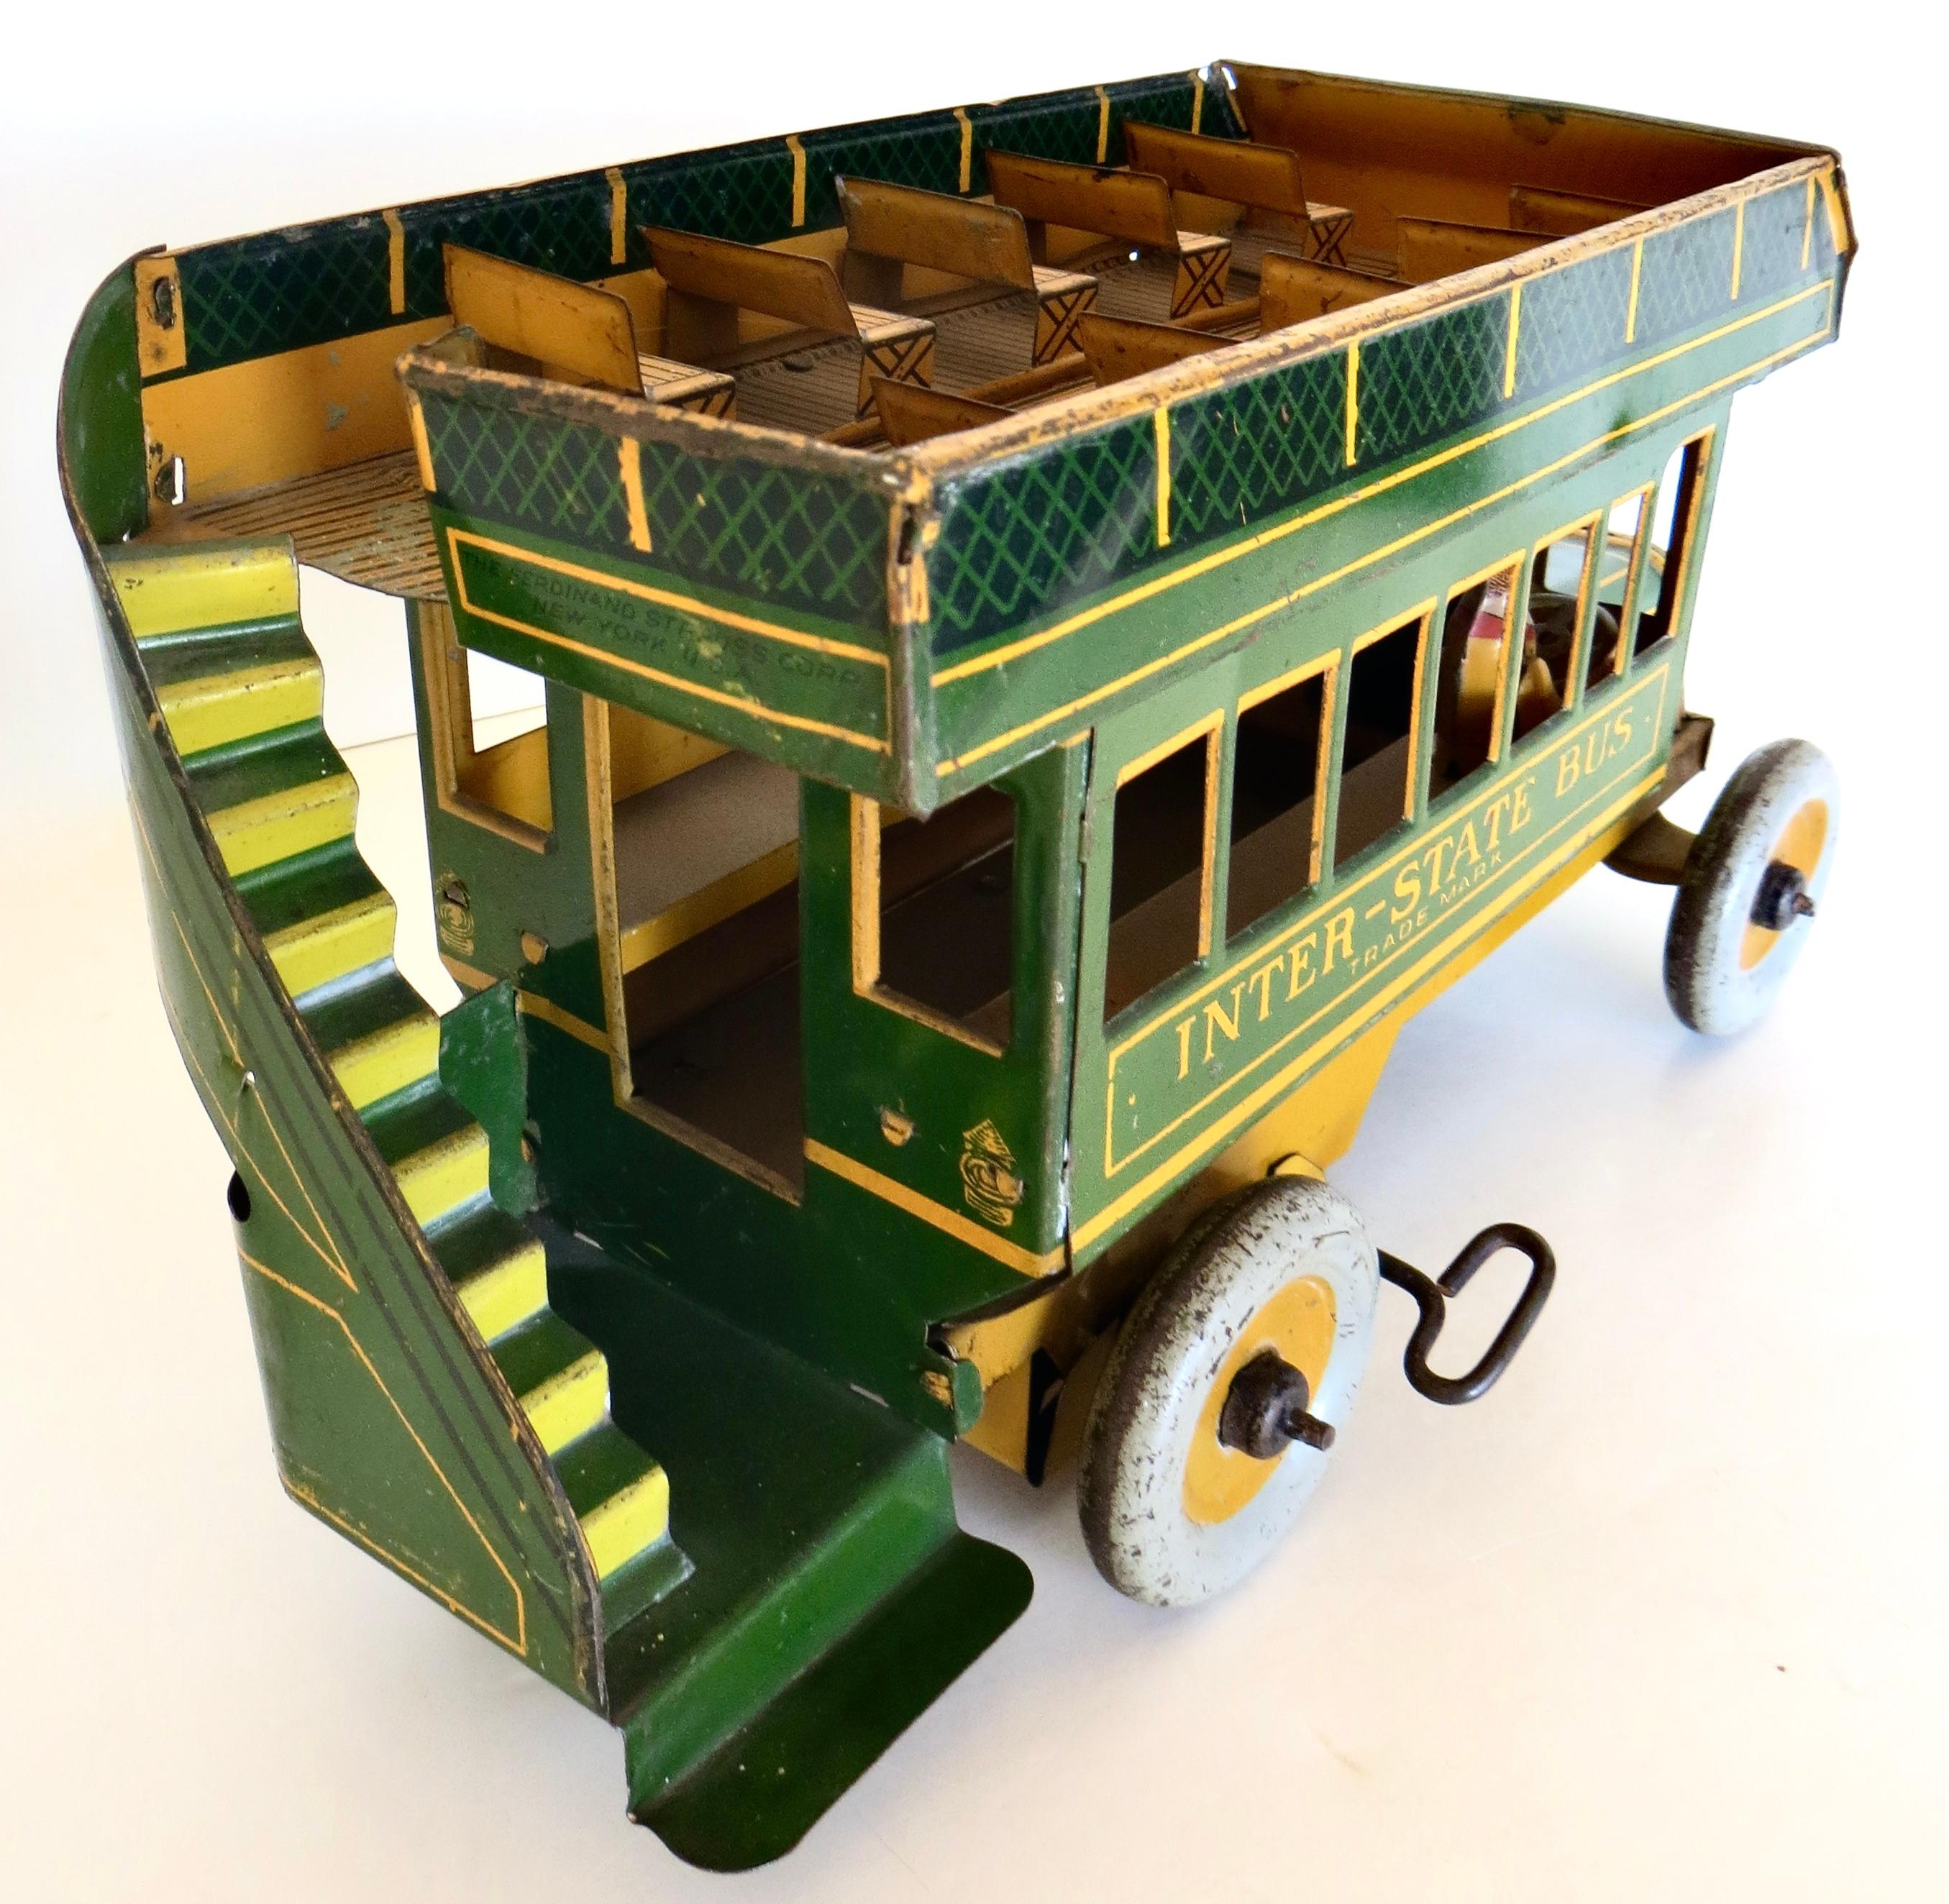 Metalwork Antique Toy Wind-Up Double Decker Bus by Ferdinand Strauss Toy Co. Circa 1925 For Sale